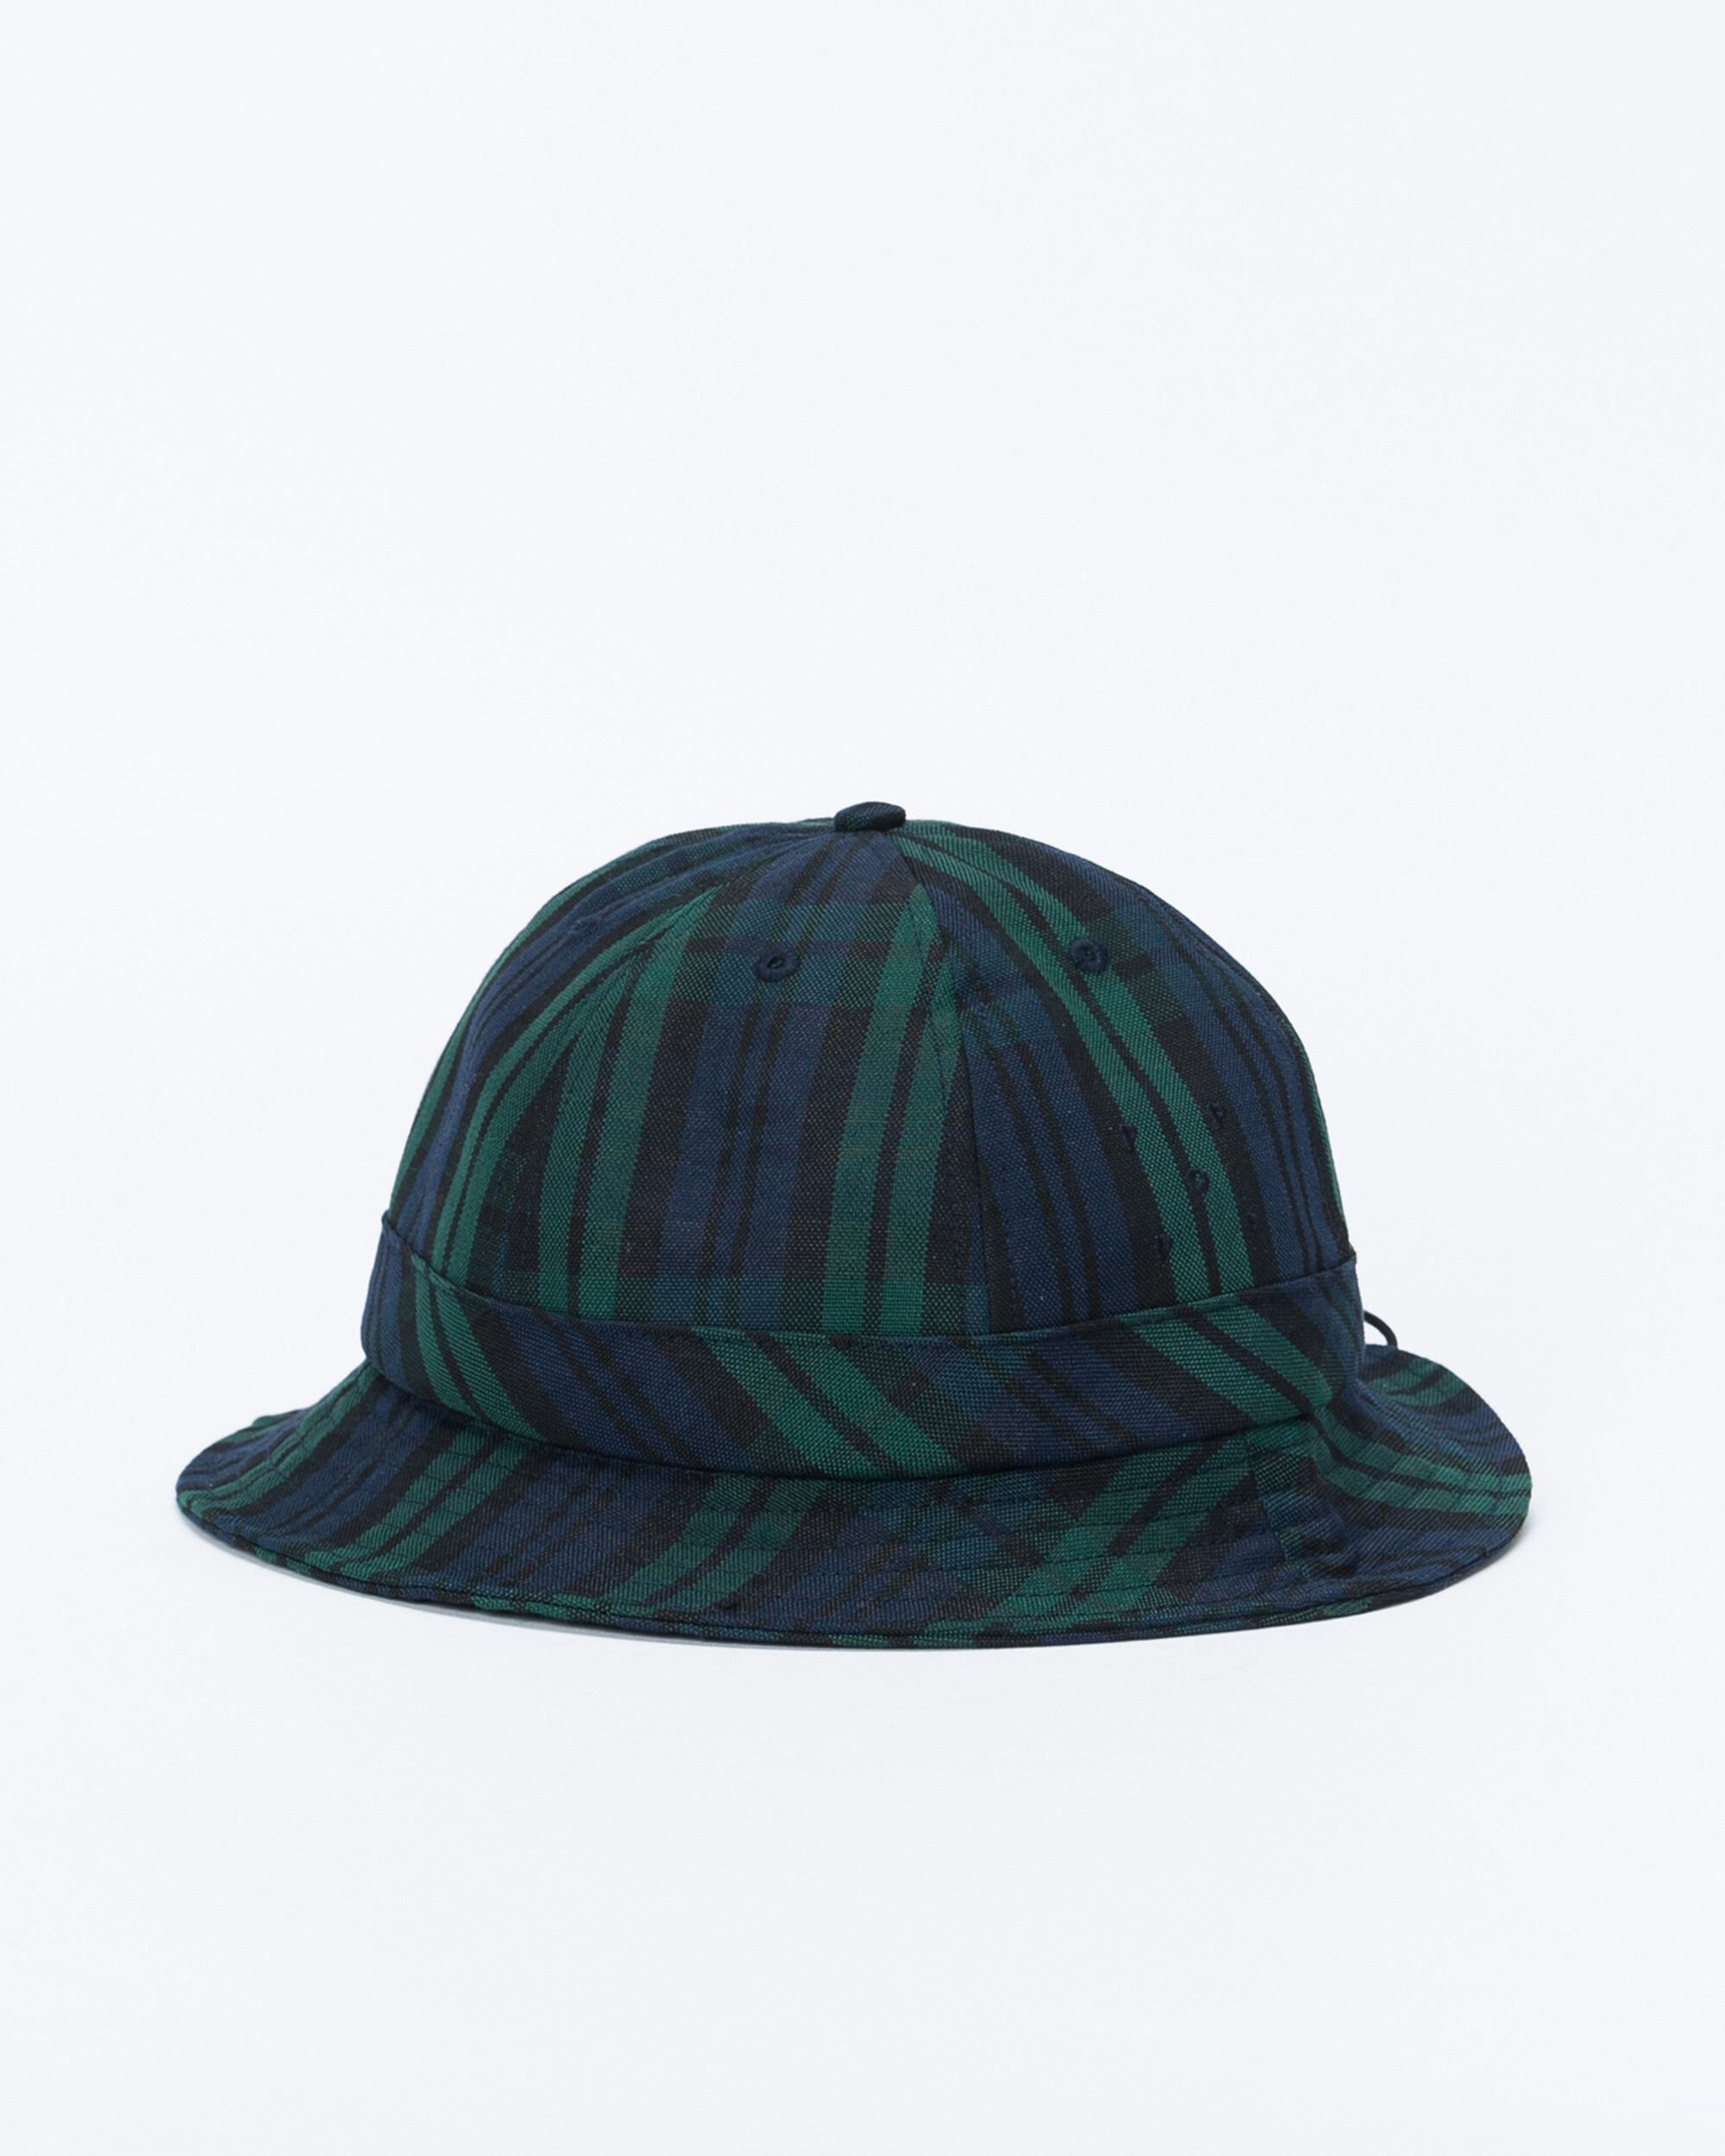 Pop Trading Co bell hat nightwatch plaid